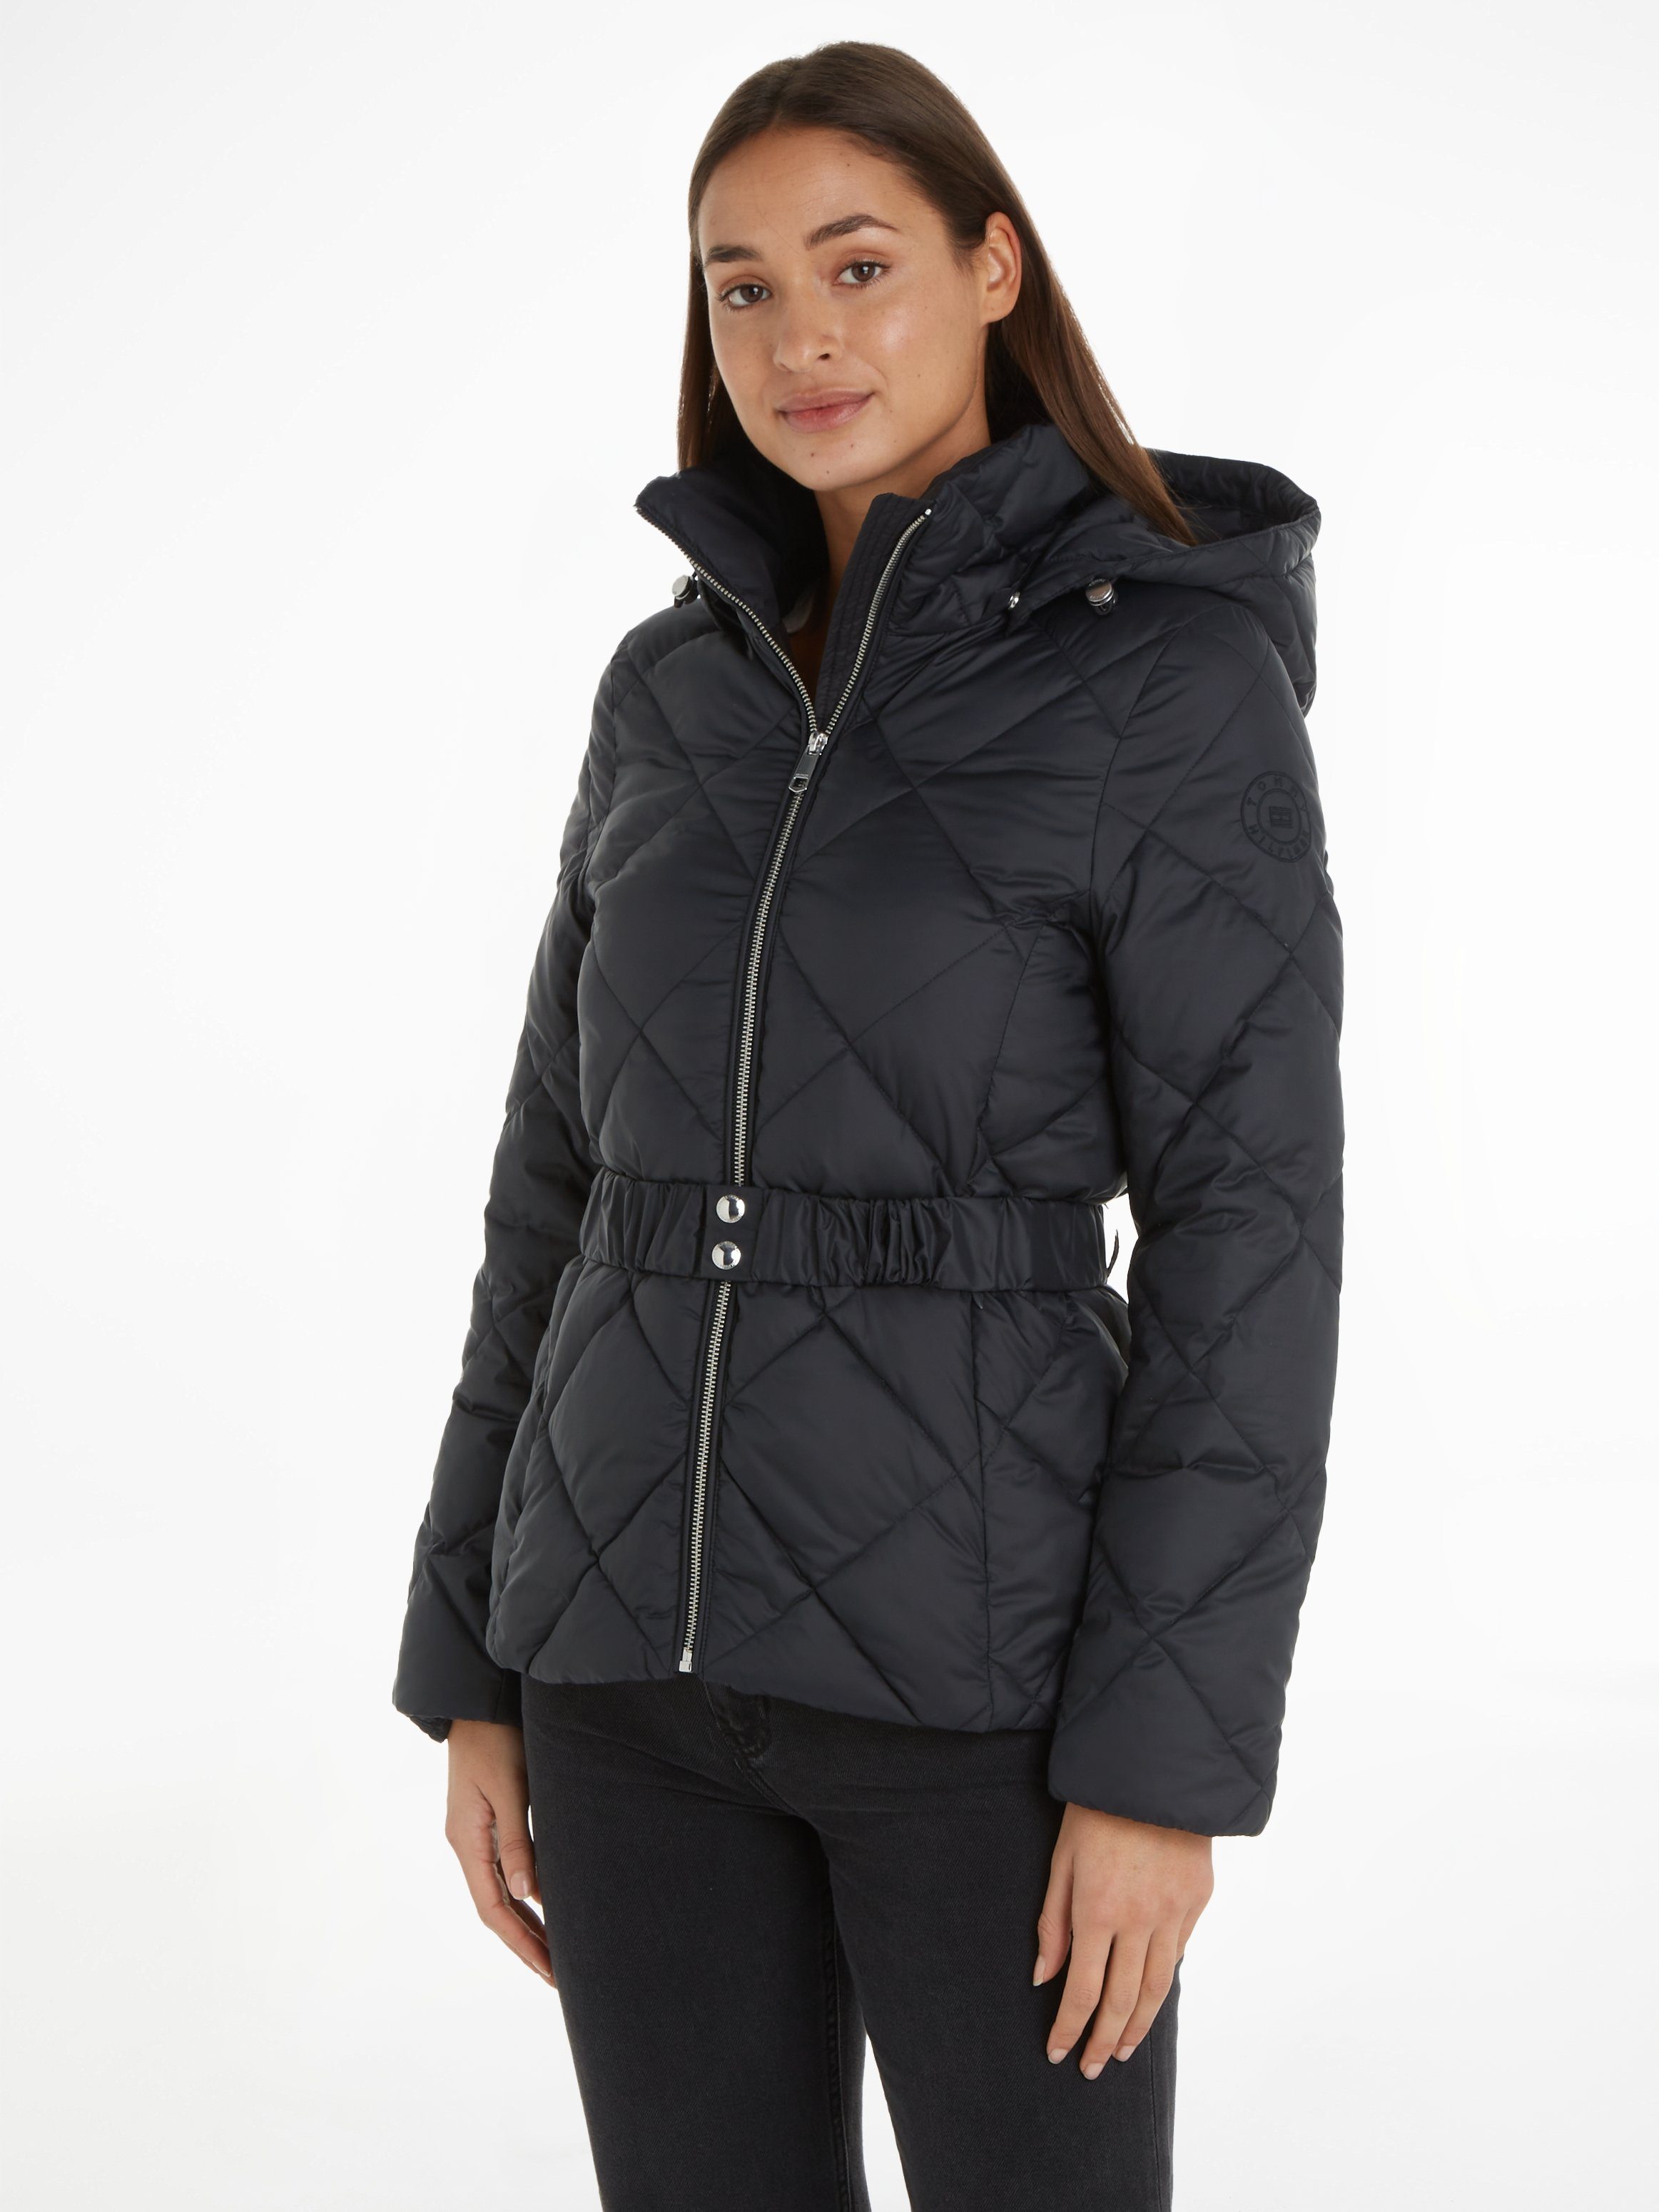 QUILTED ELEVATED Steppjacke BELTED Logostickerei mit JACKET Hilfiger Tommy